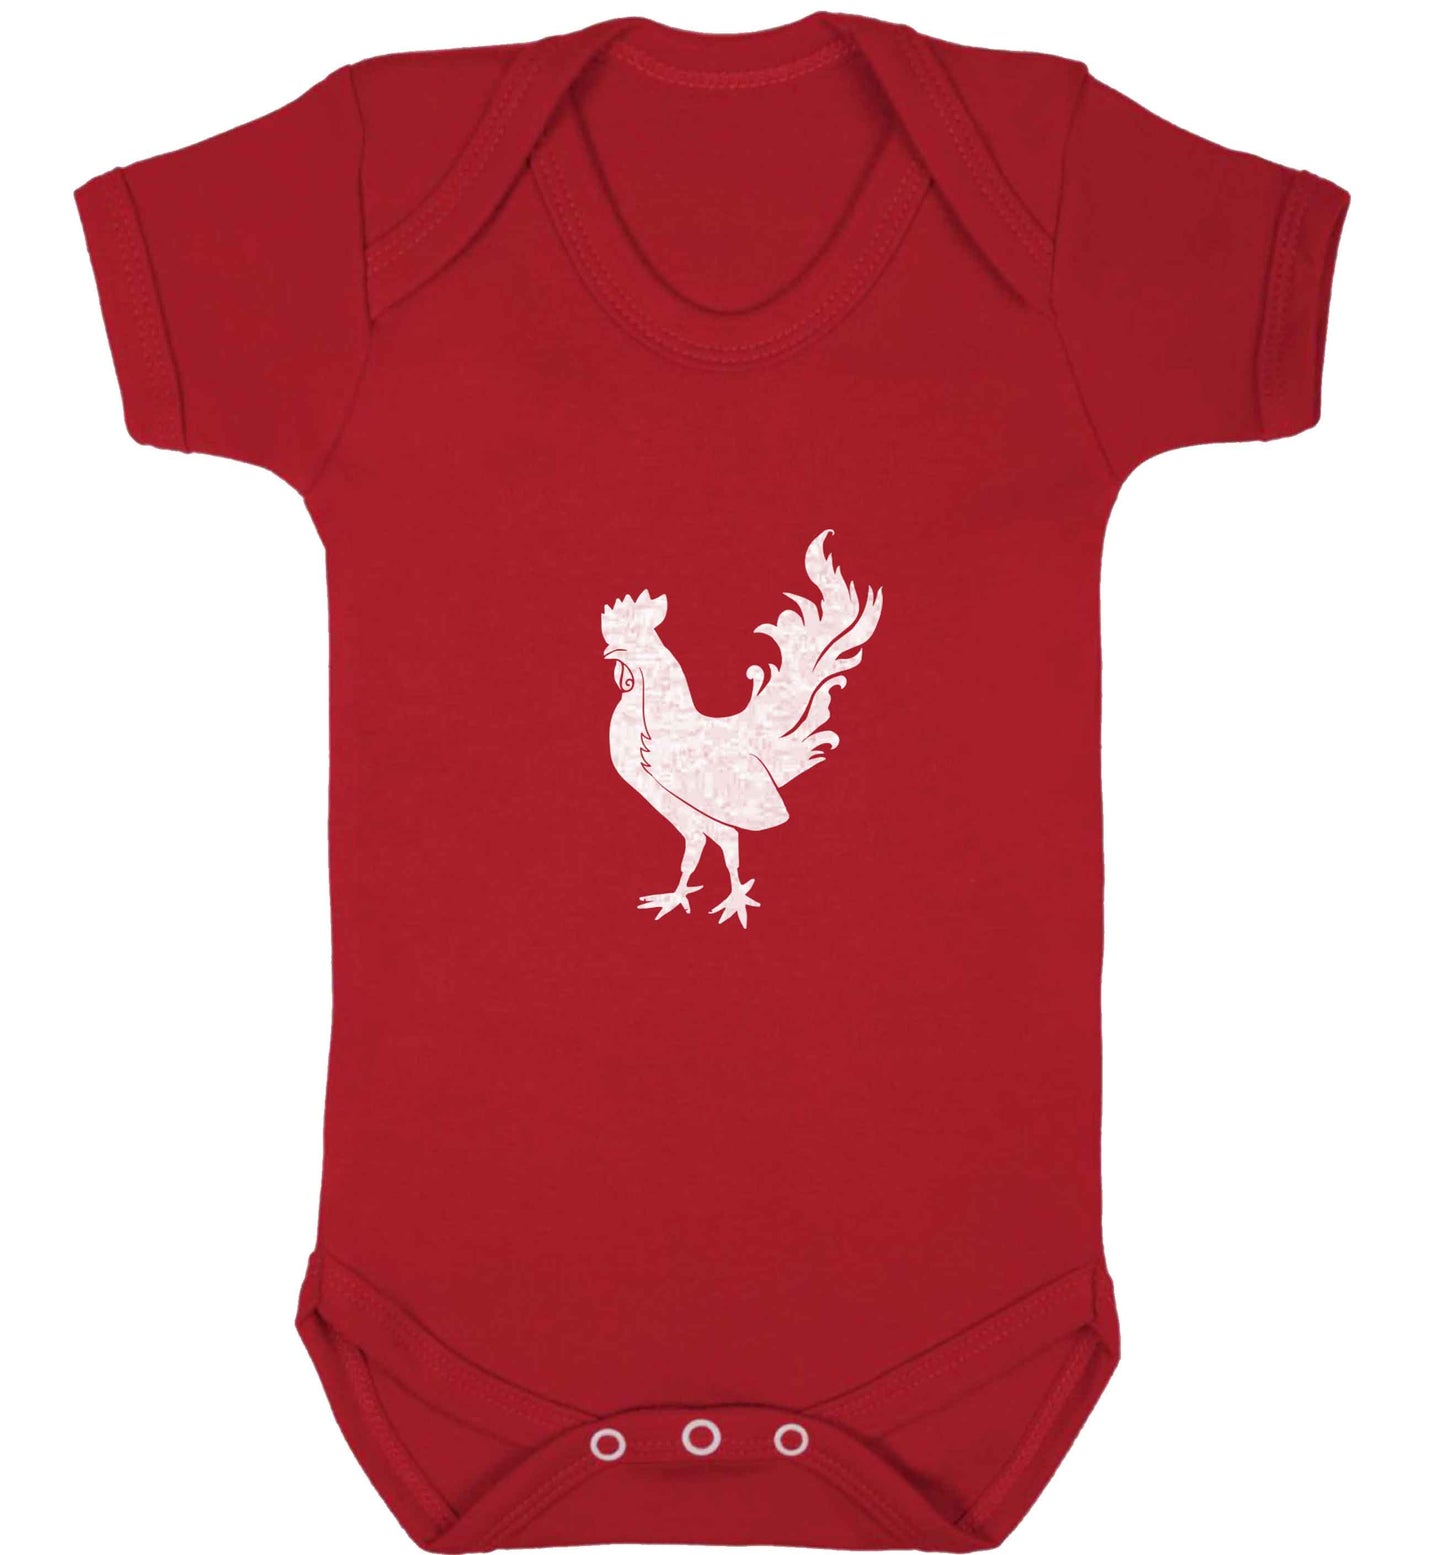 Rooster baby vest red 18-24 months